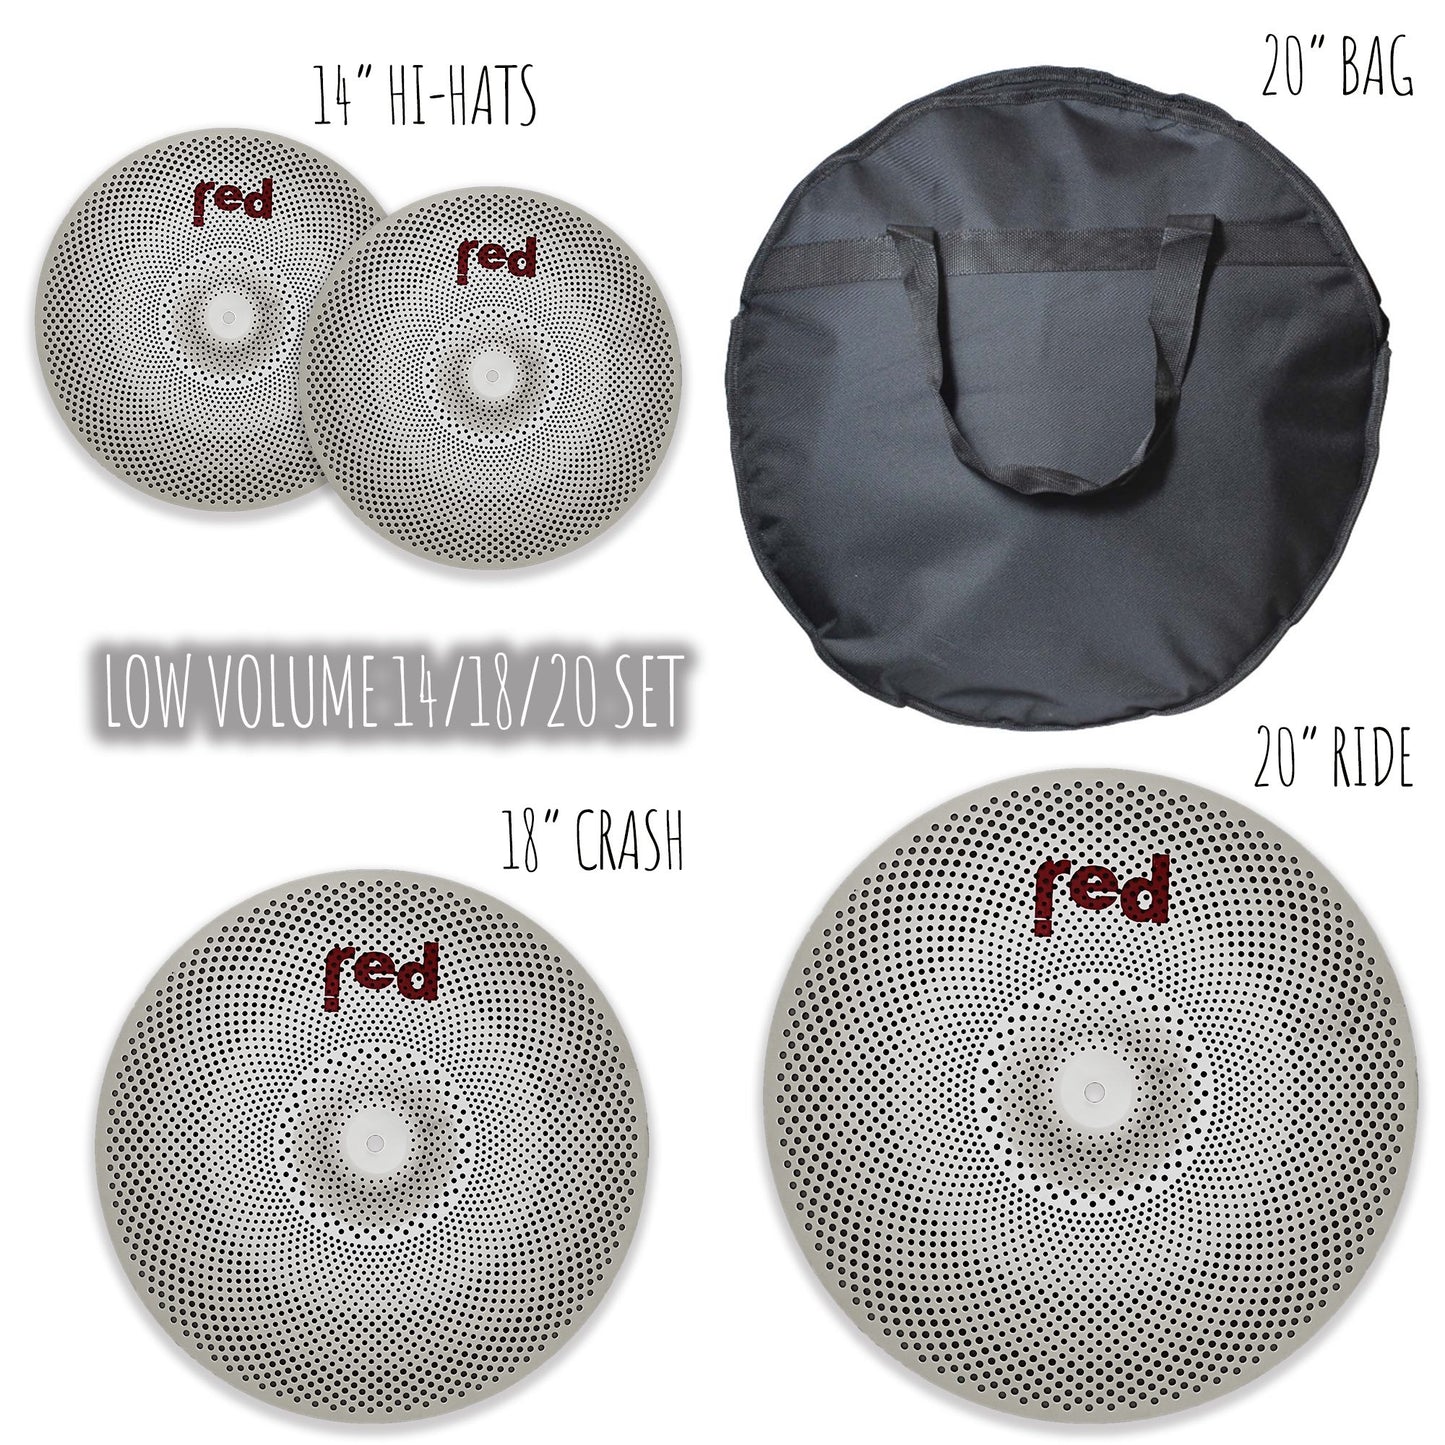 Low Volume 4 piece Cymbal Set with free 20" Bag